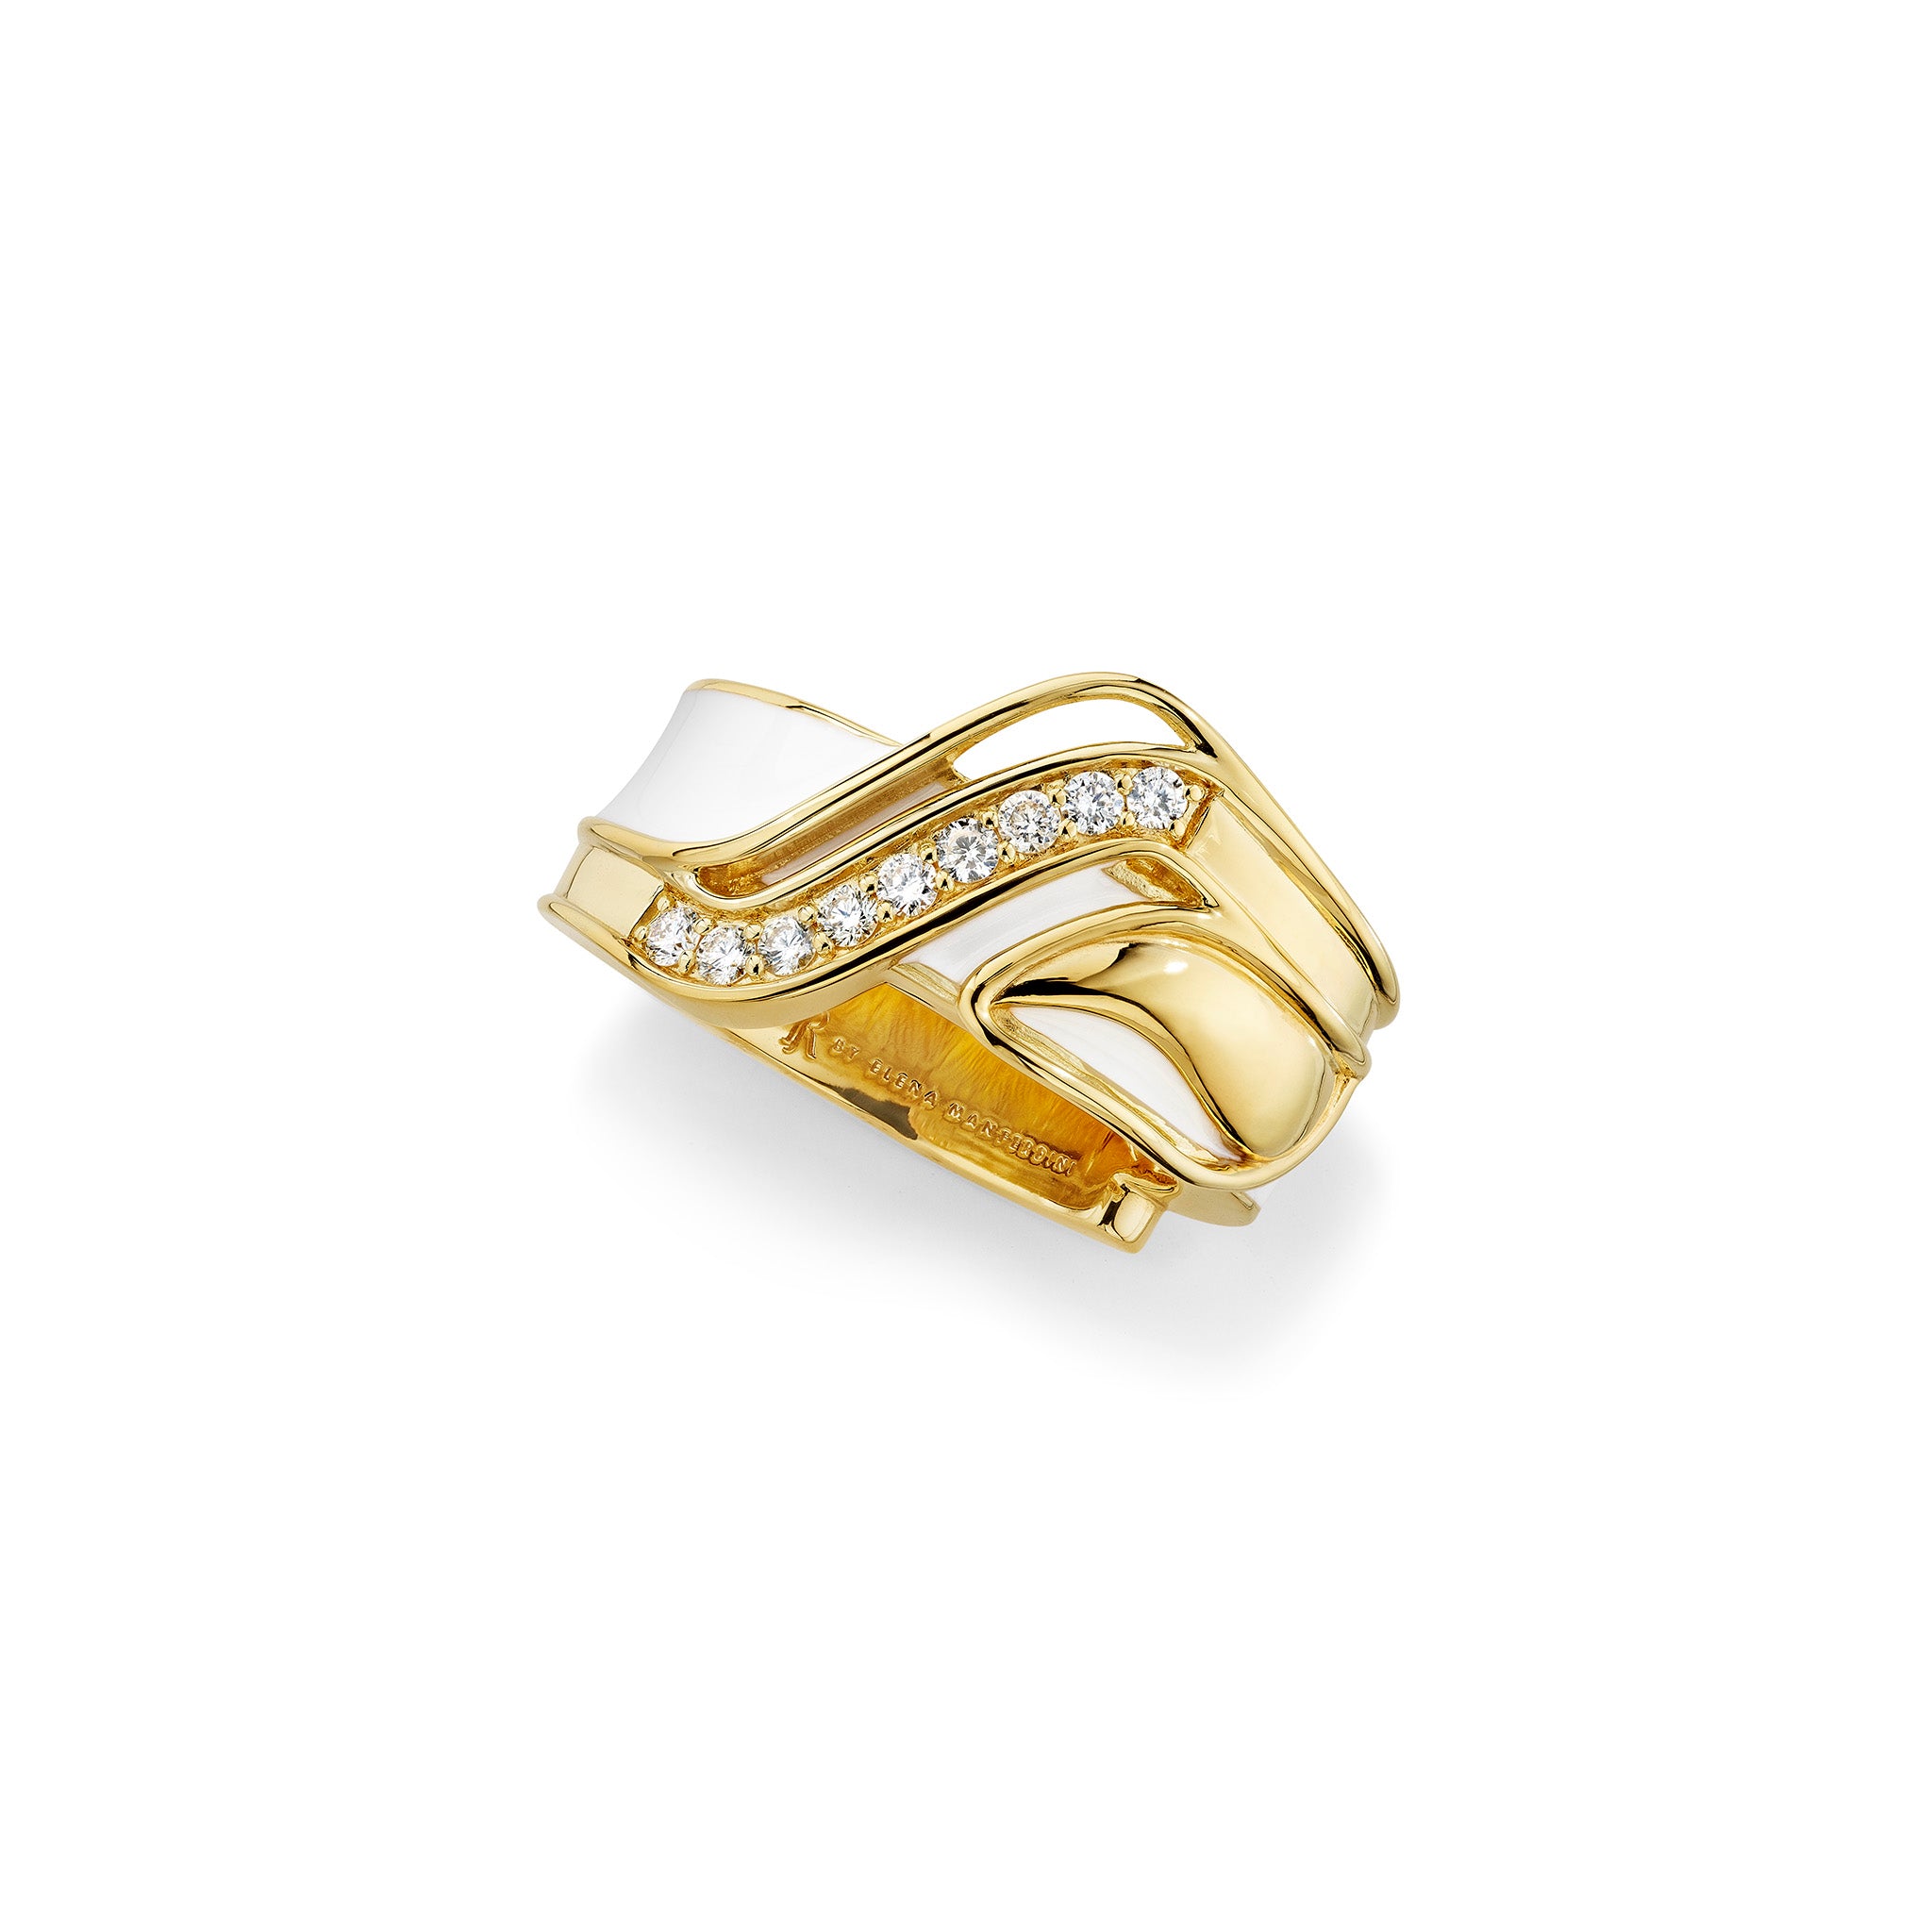 Adoro Band Ring with Diamonds in 18K Gold Vermeil